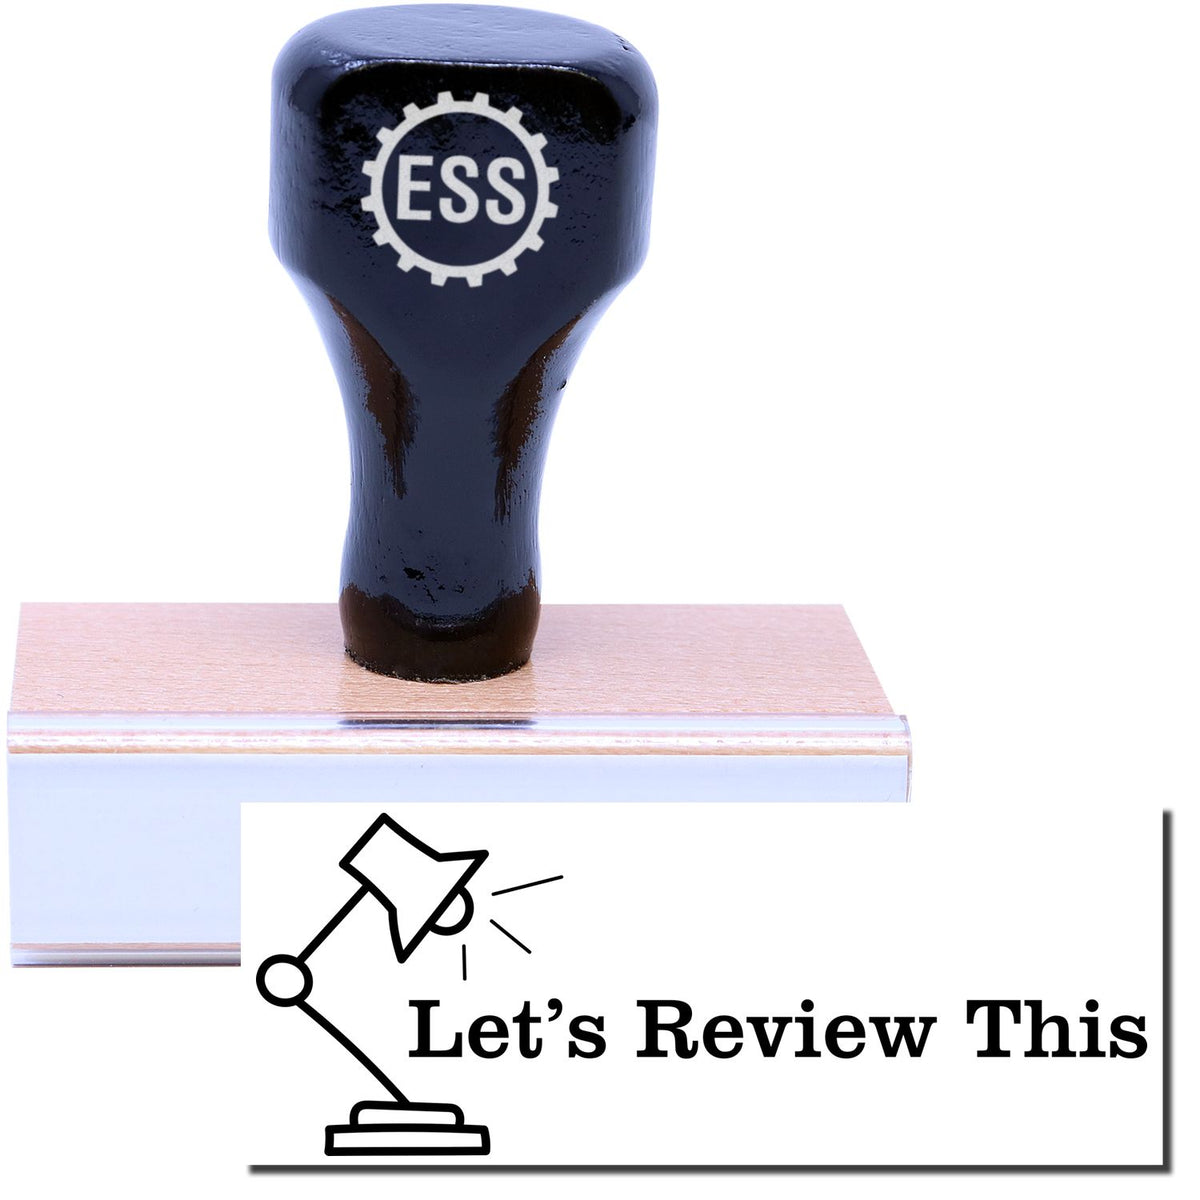 A stock office rubber stamp with a stamped image showing how the text &quot;Let&#39;s Review This&quot; with an image of a lamp on the left side is displayed after stamping.